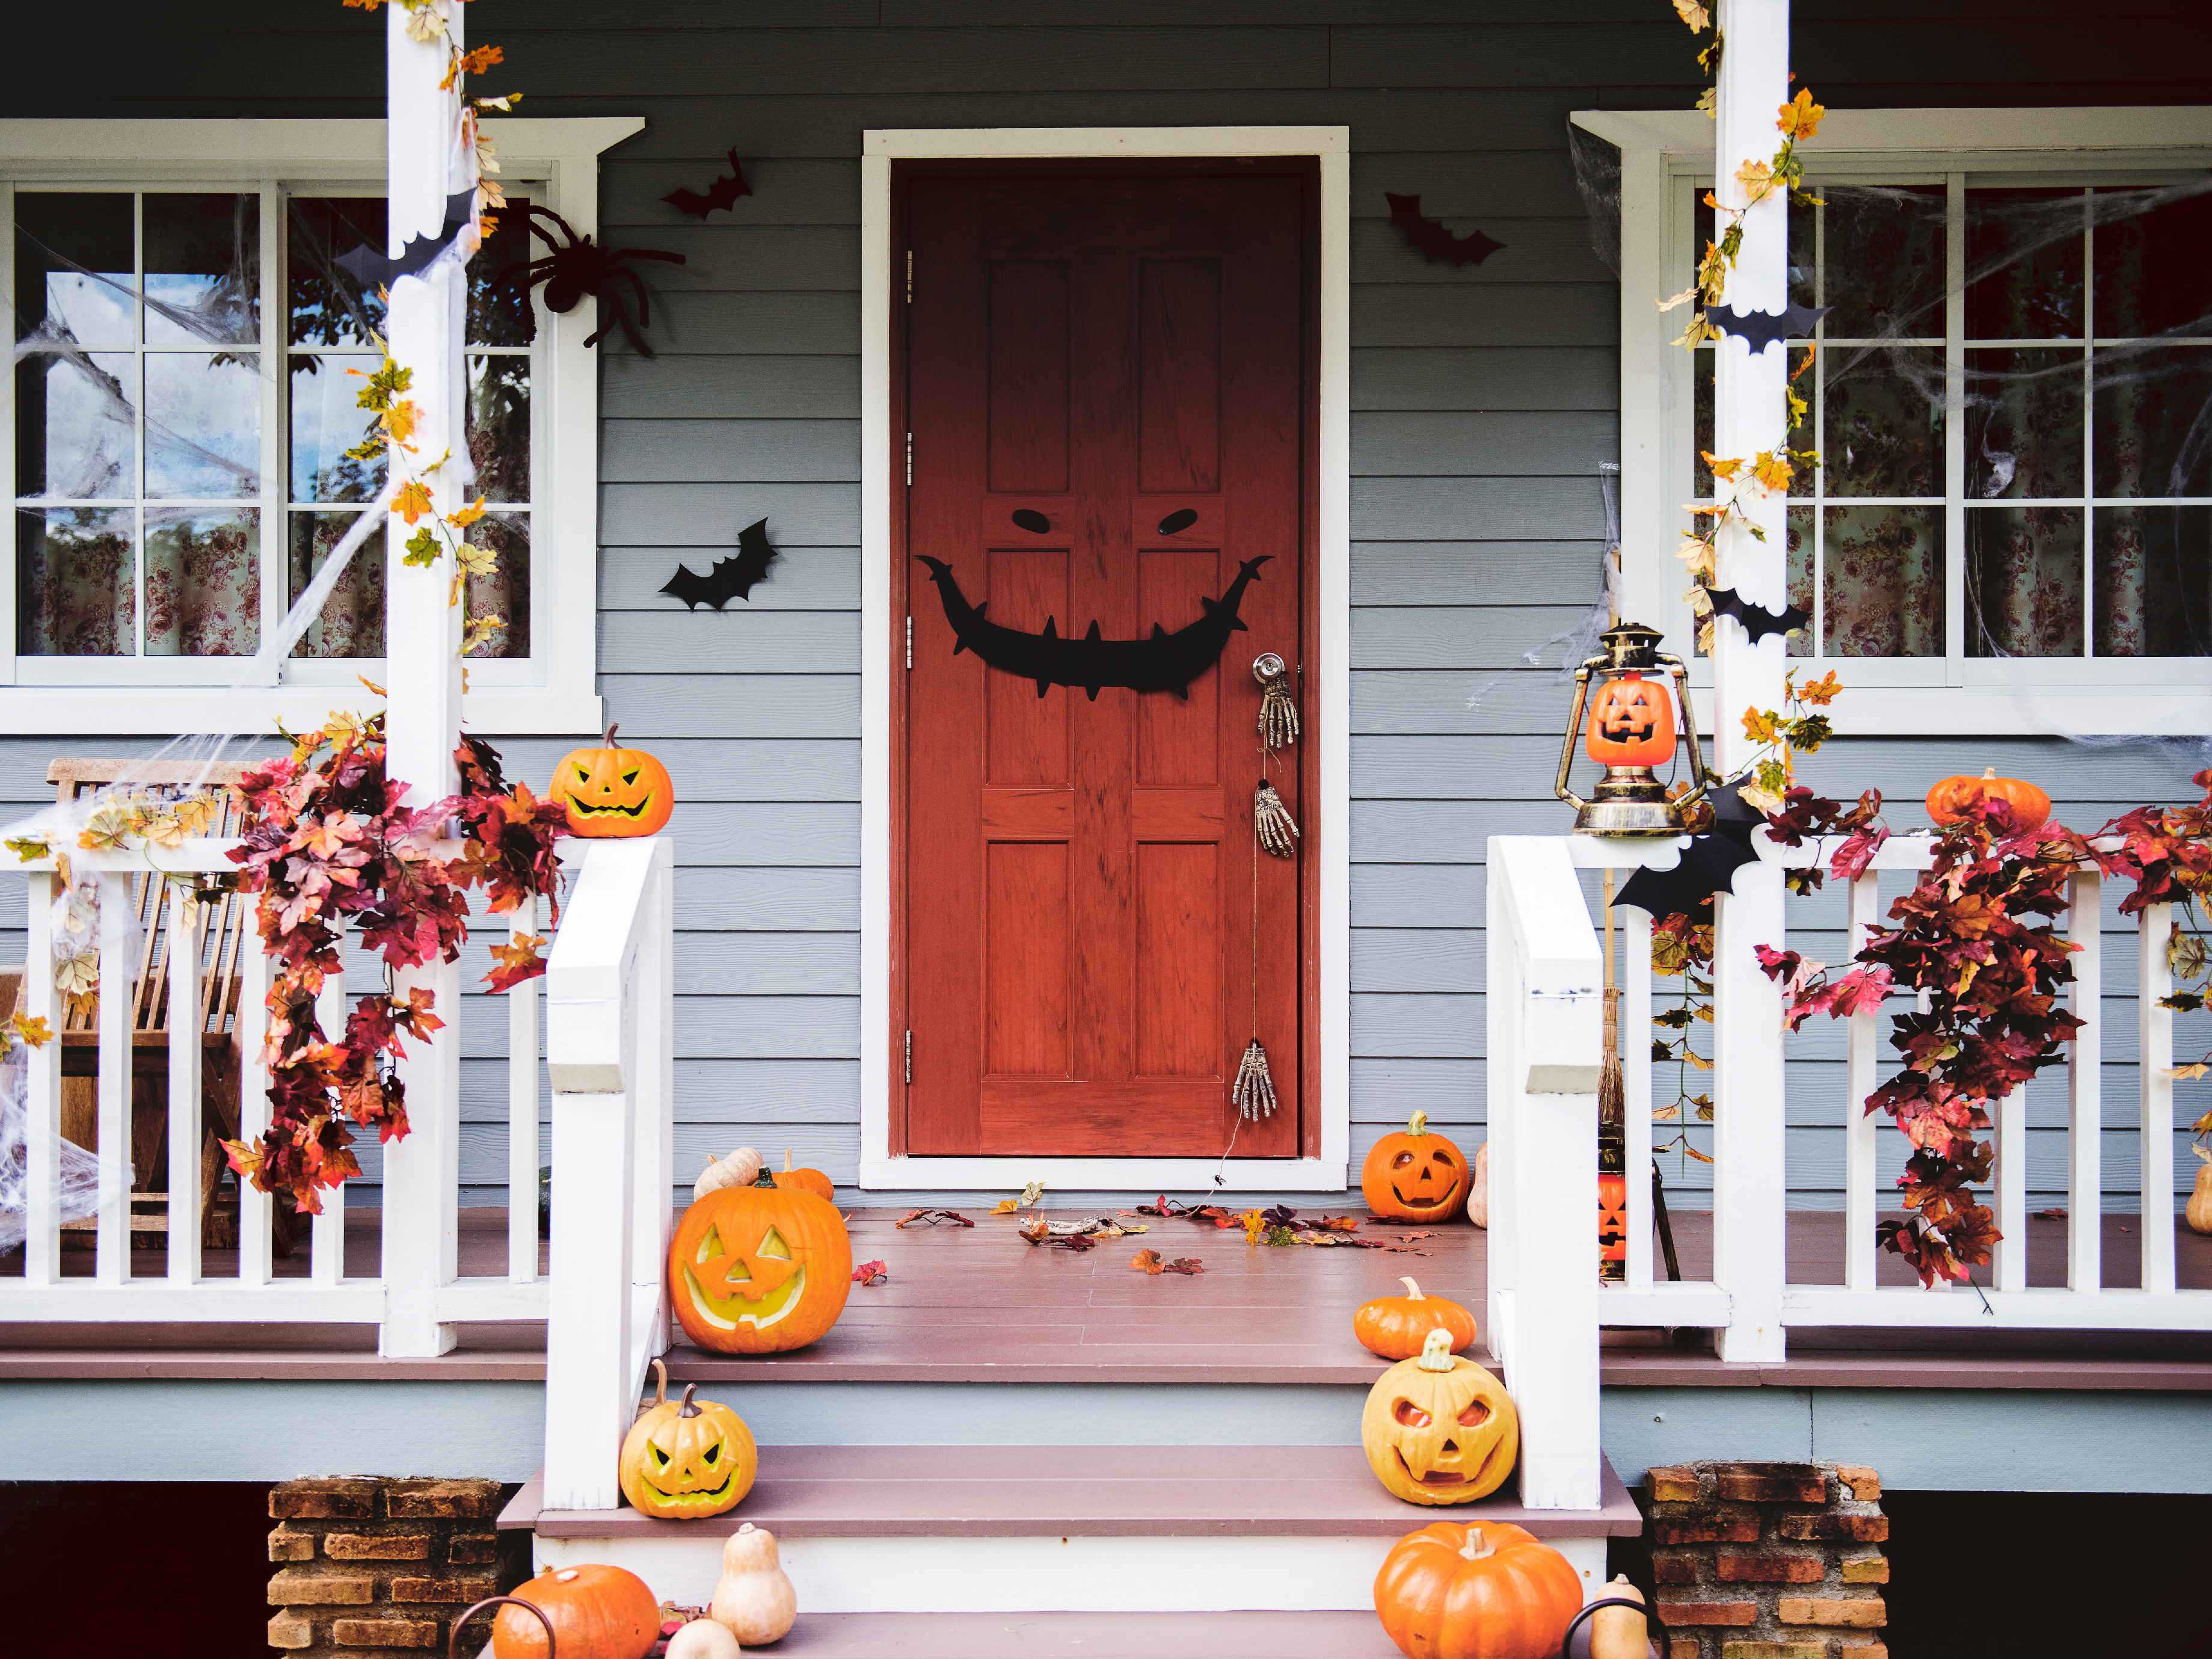 The best Halloween decorated houses